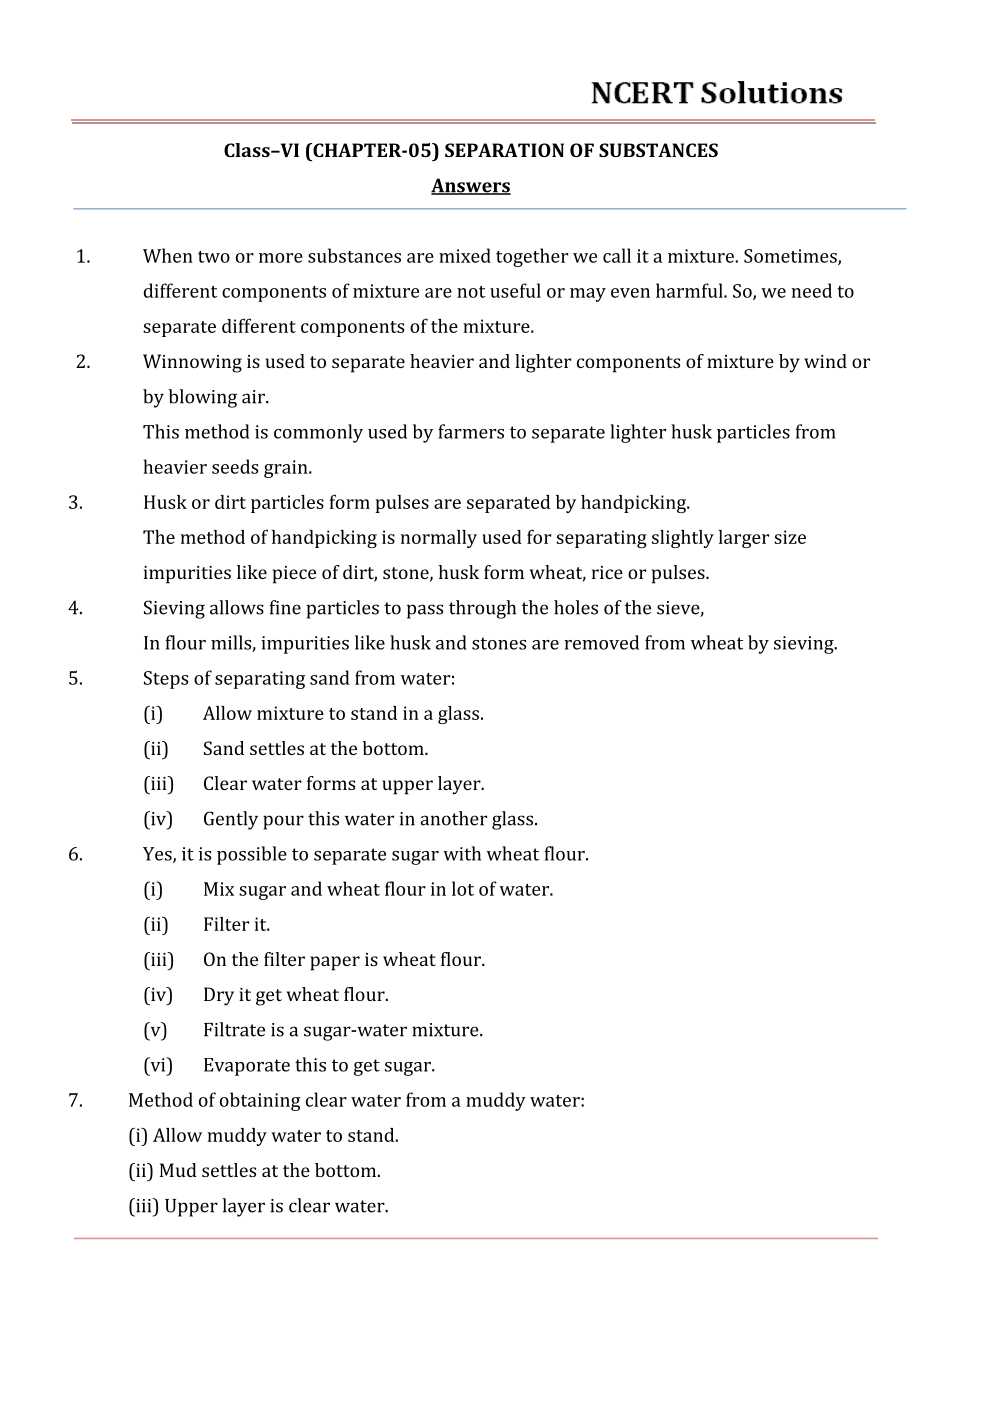 NCERT Solutions For Class 6 Science Chapter 5